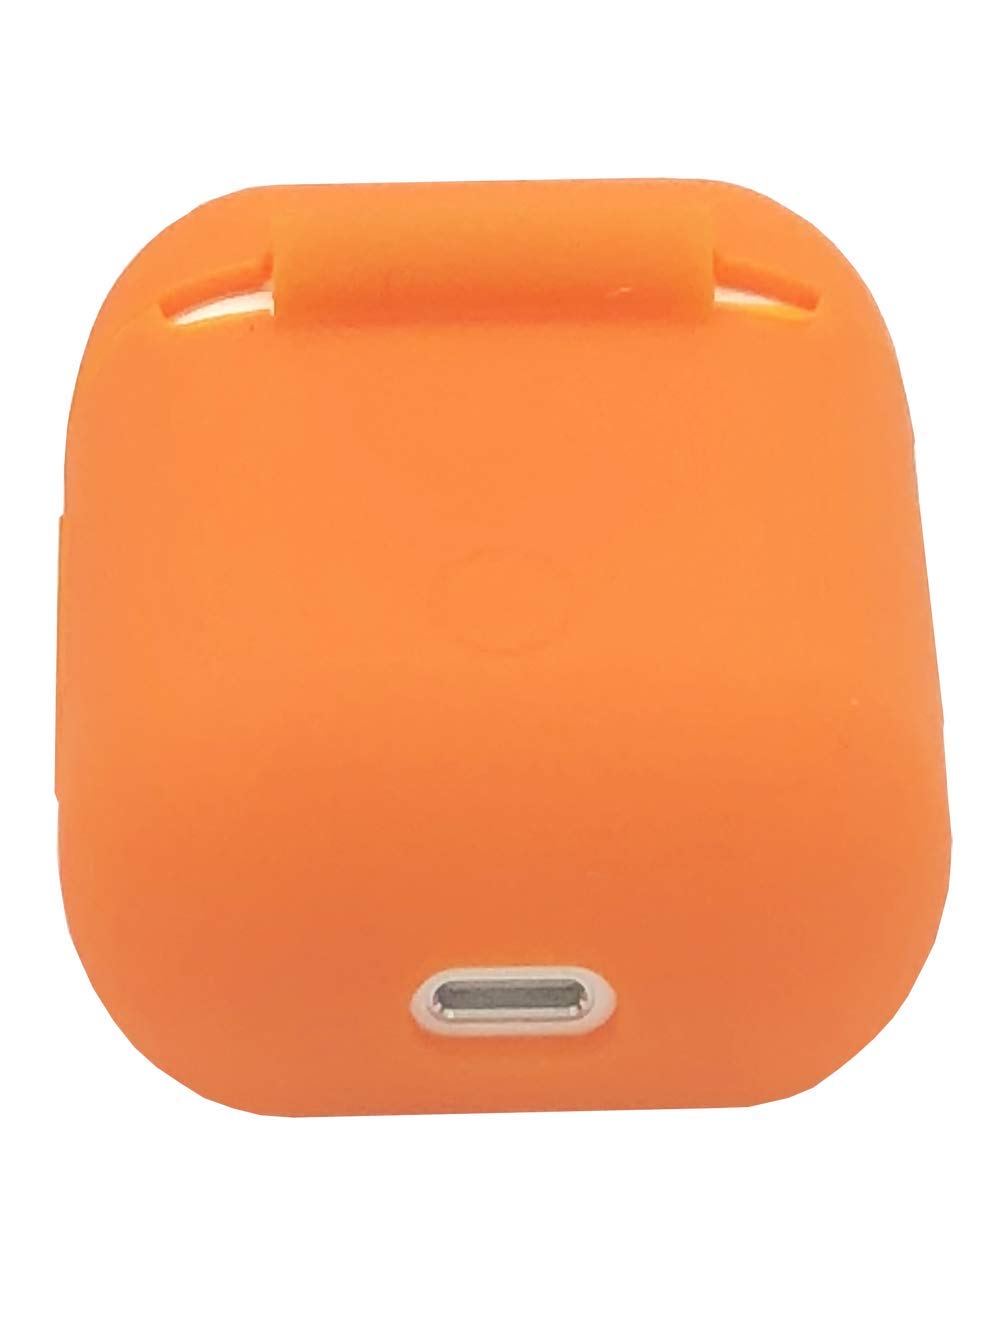 HappyCover Compatible for Airpods Case 2 & 1, Protective Silicone Cover Skin for Airpods Charging Case (Vibrant Orange)